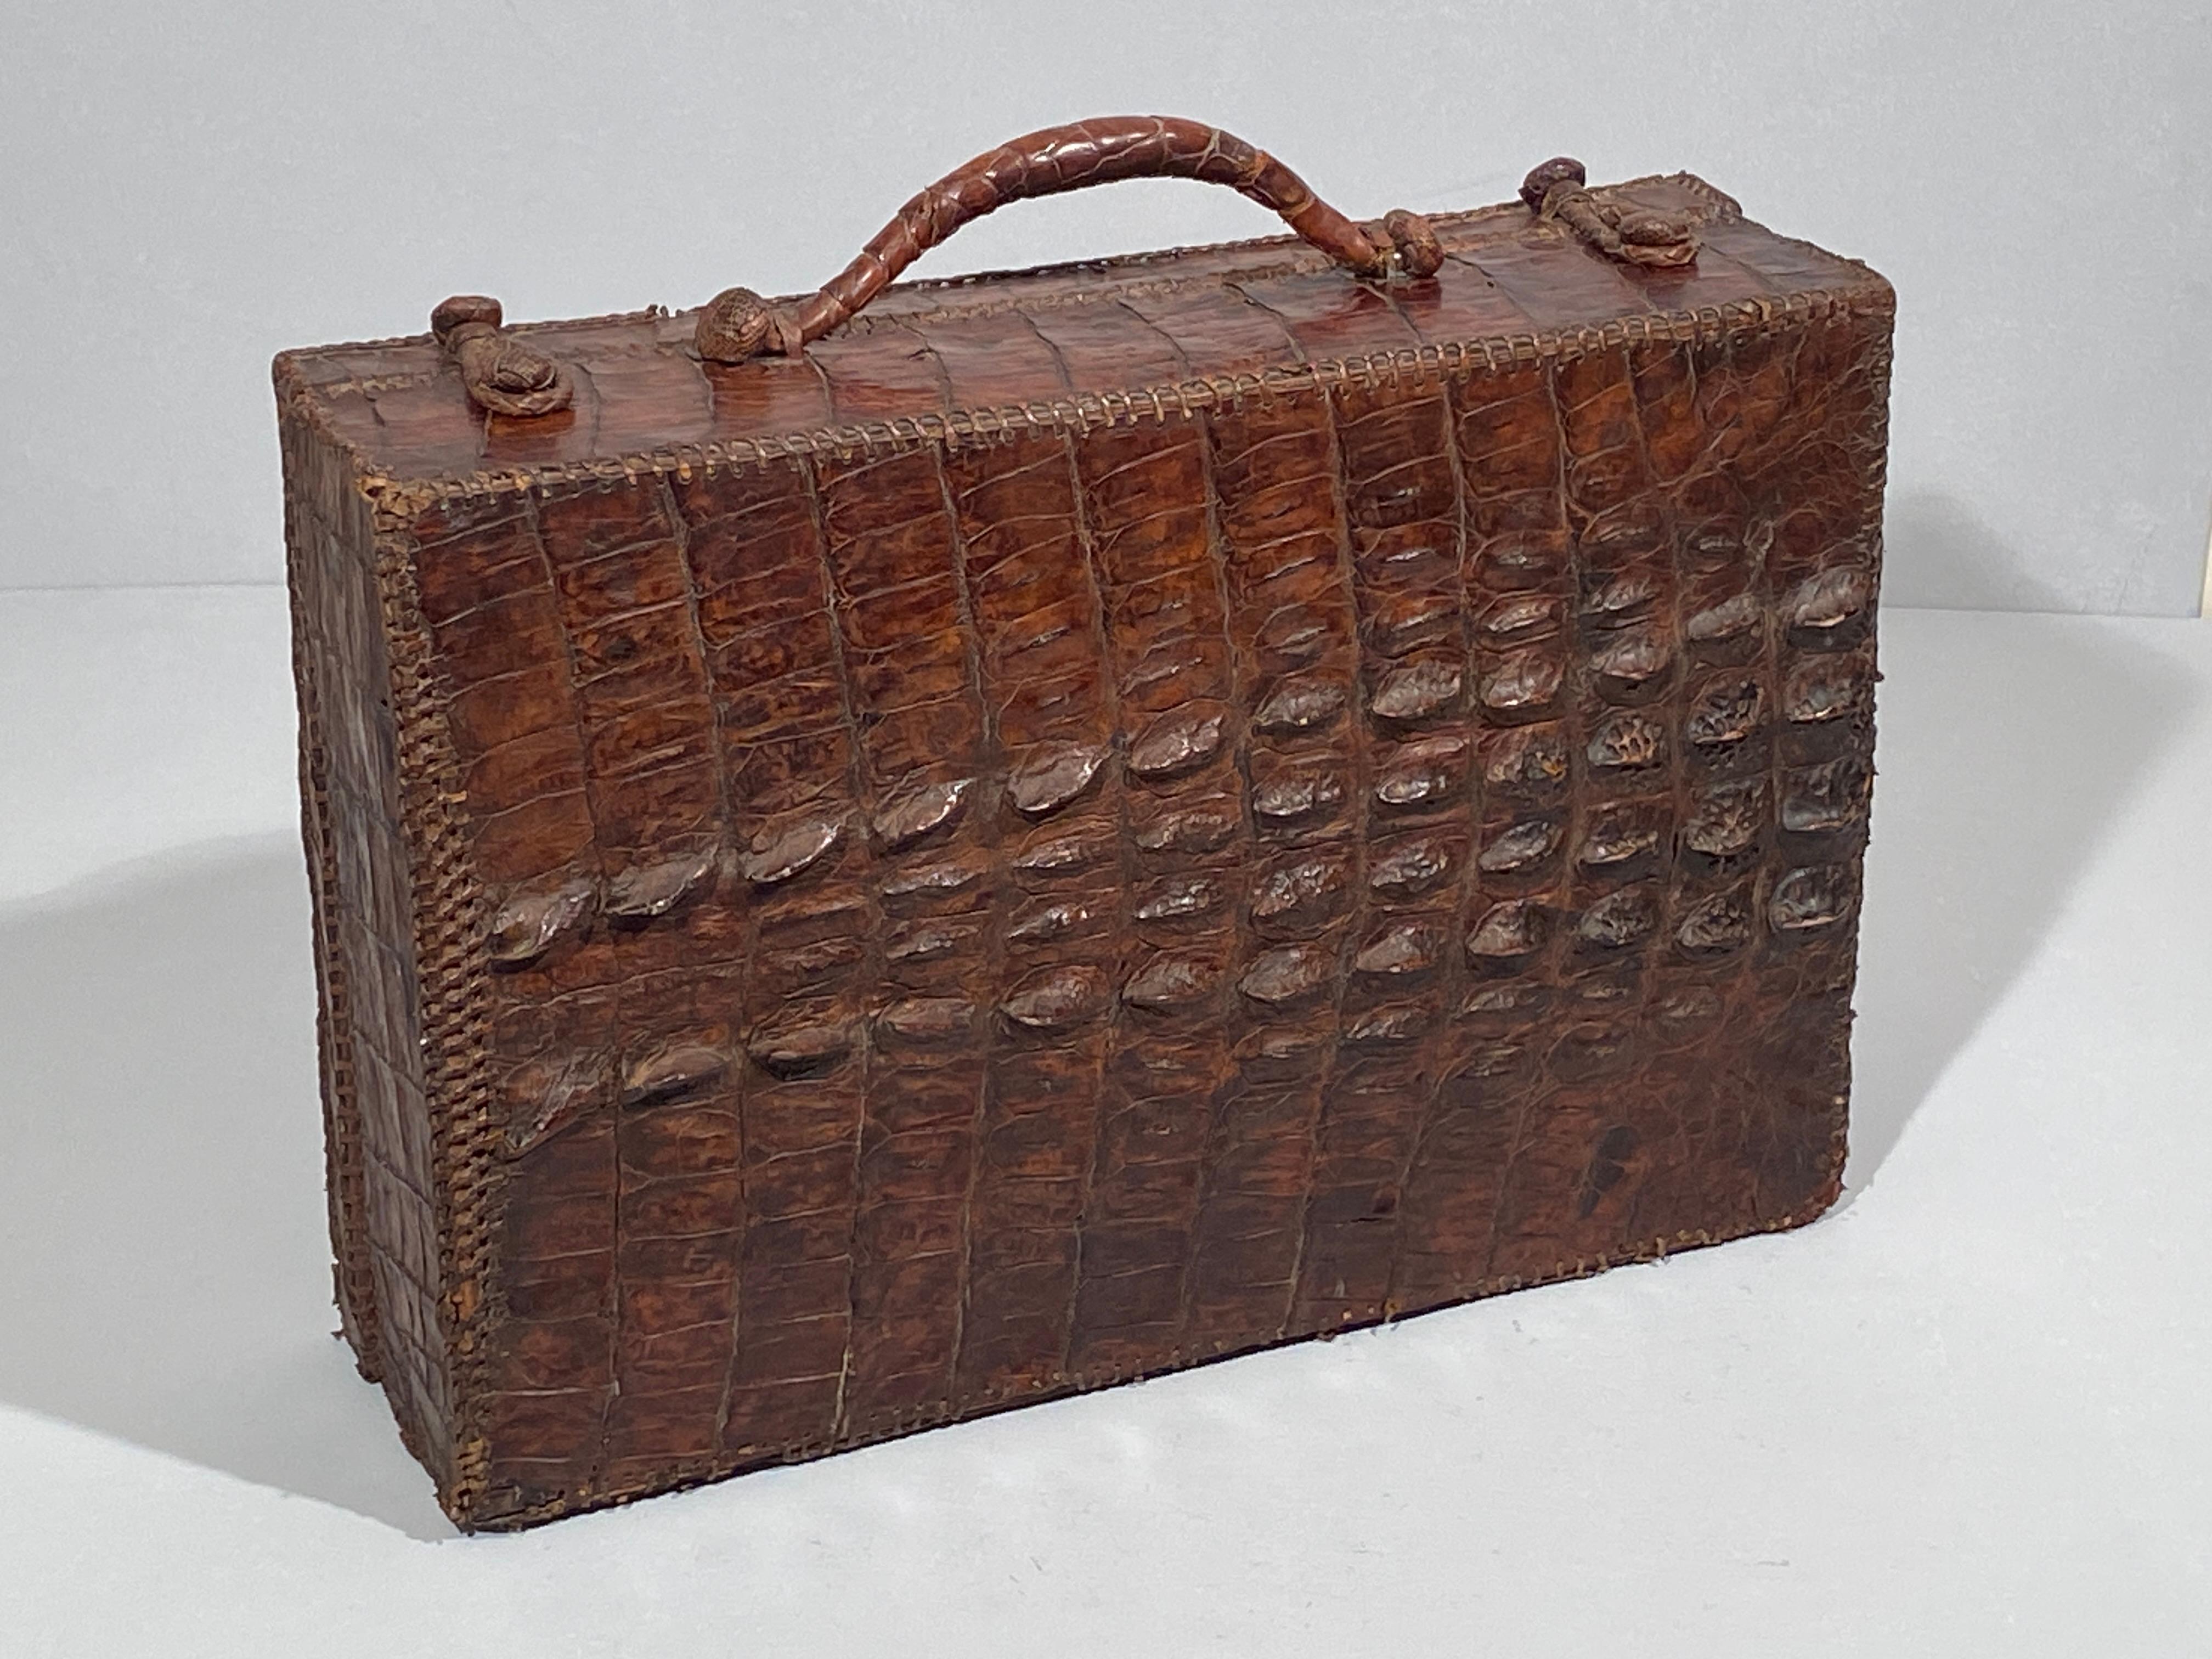 Antique suitcase made of crocodile leather featuring prominent hornback scales hand stitched with fine leather lacing, an attractive antique reptile skin suitcase with a beautiful patina,  suitable as a decoration object or useful storage in your